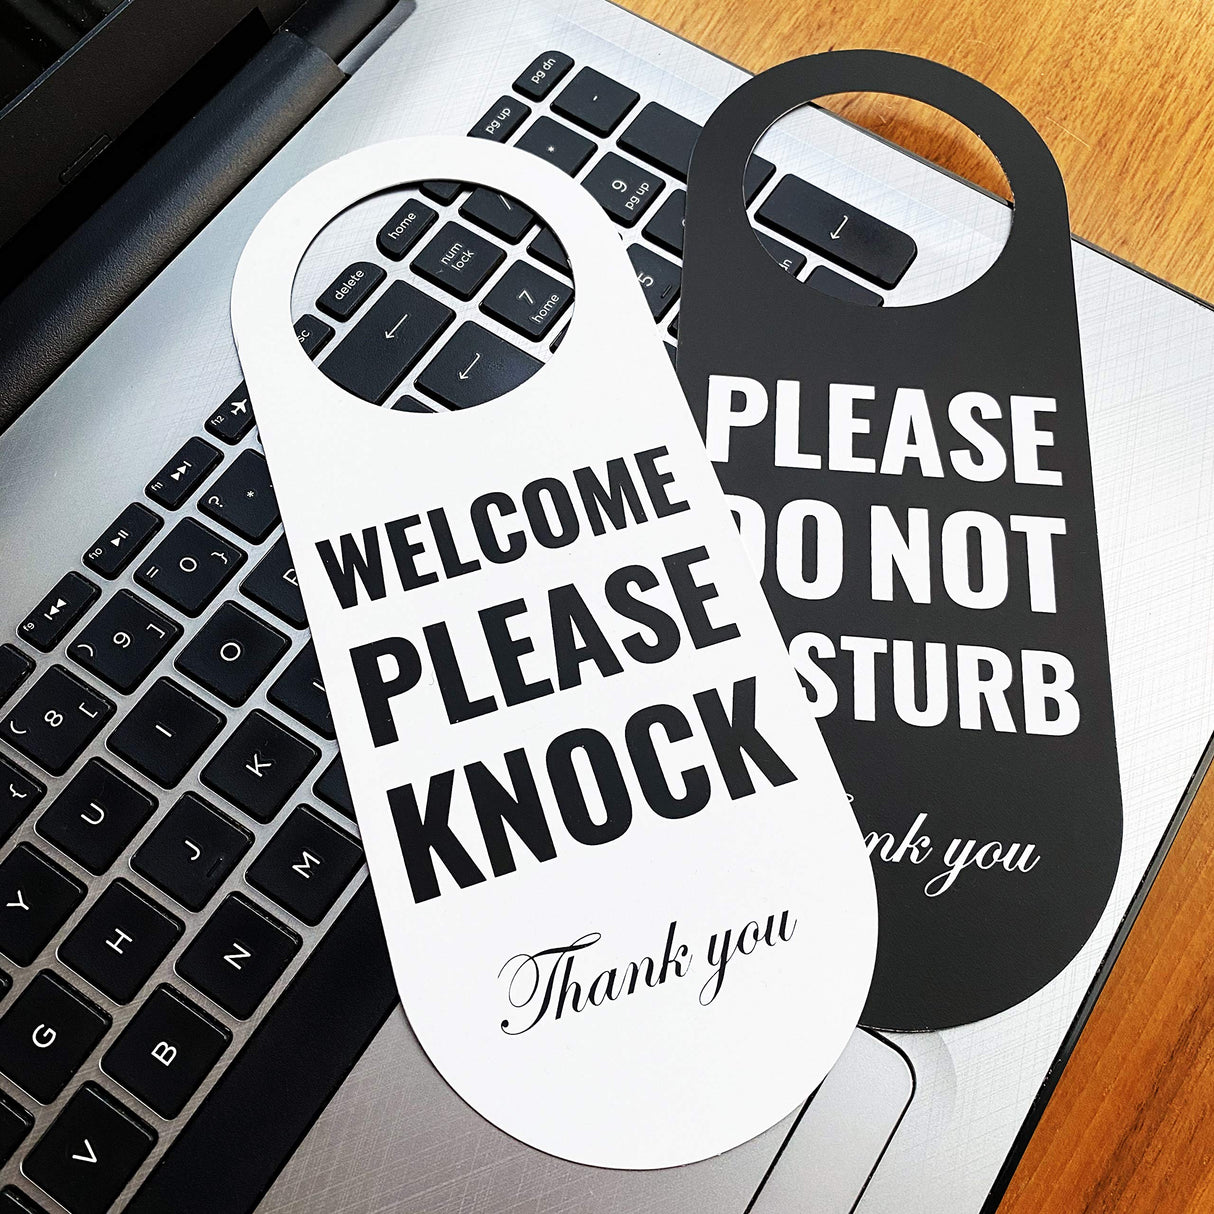 Do Not Disturb Door Hanger Sign 2 Pack (Black/White Double Sided) Please Do Not Disturb on Front and Welcome Please Knock on Back Side, for Office Home Clinic Dorm Online Class and Meeting Session